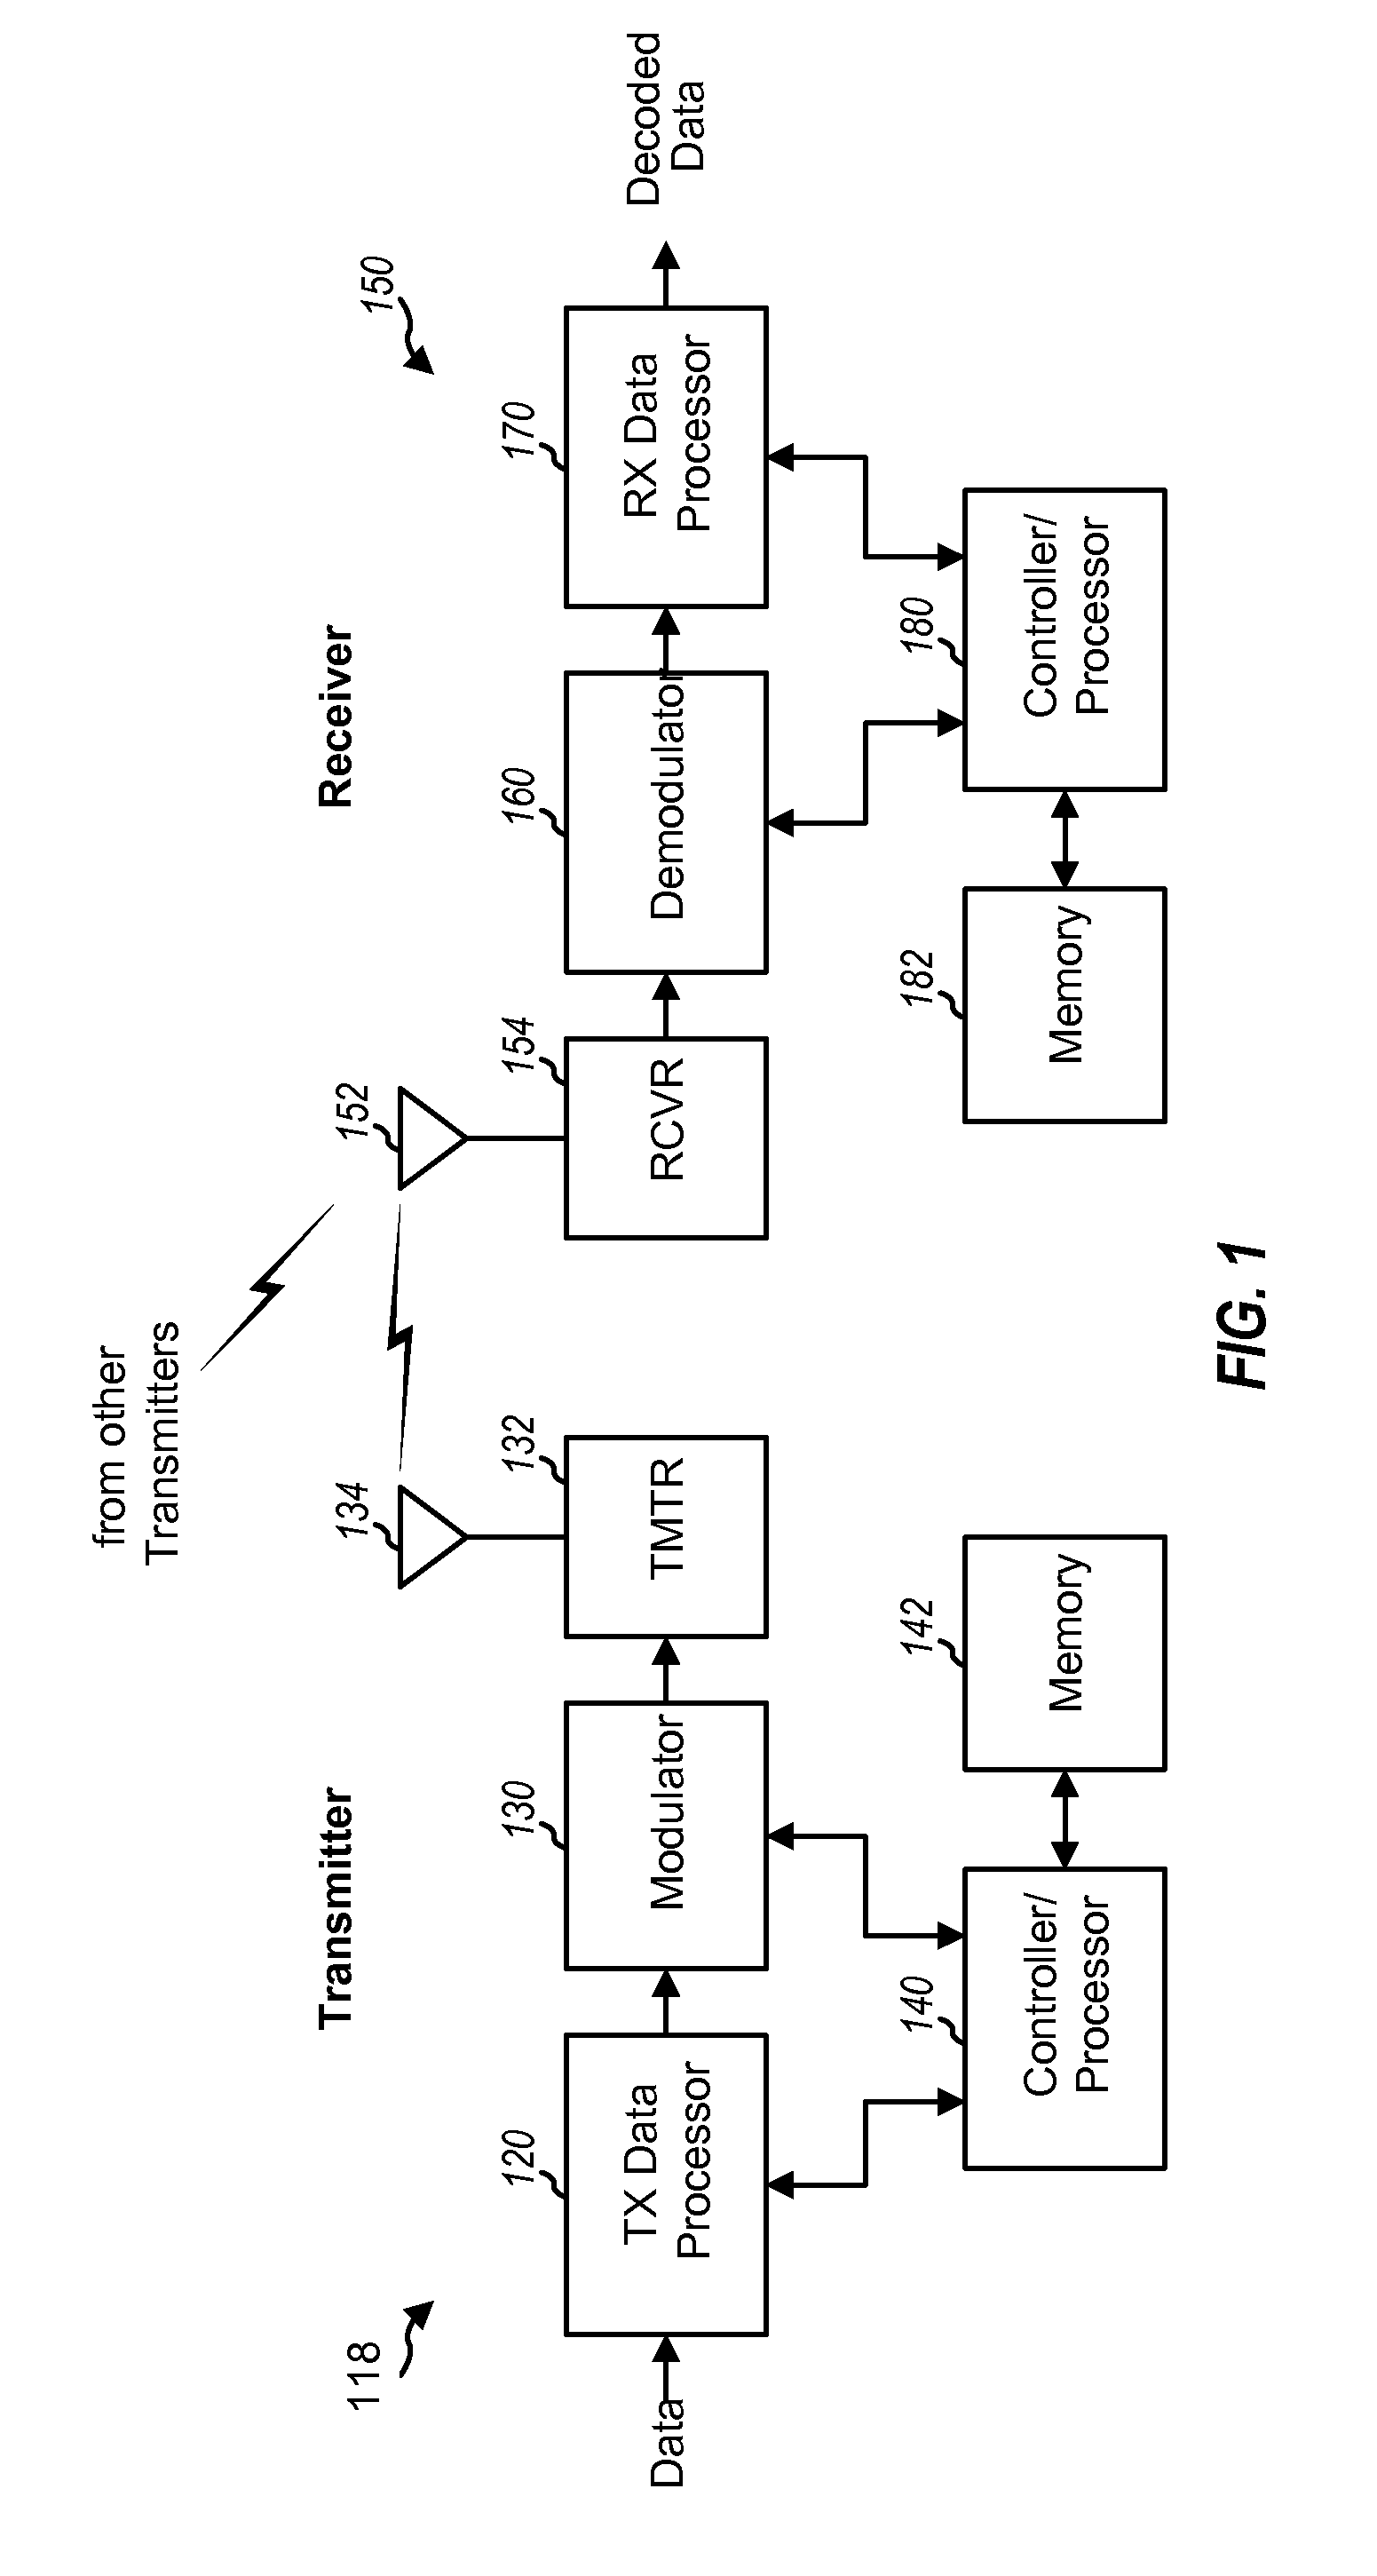 Power control method for a geran system to increase geran network capacity